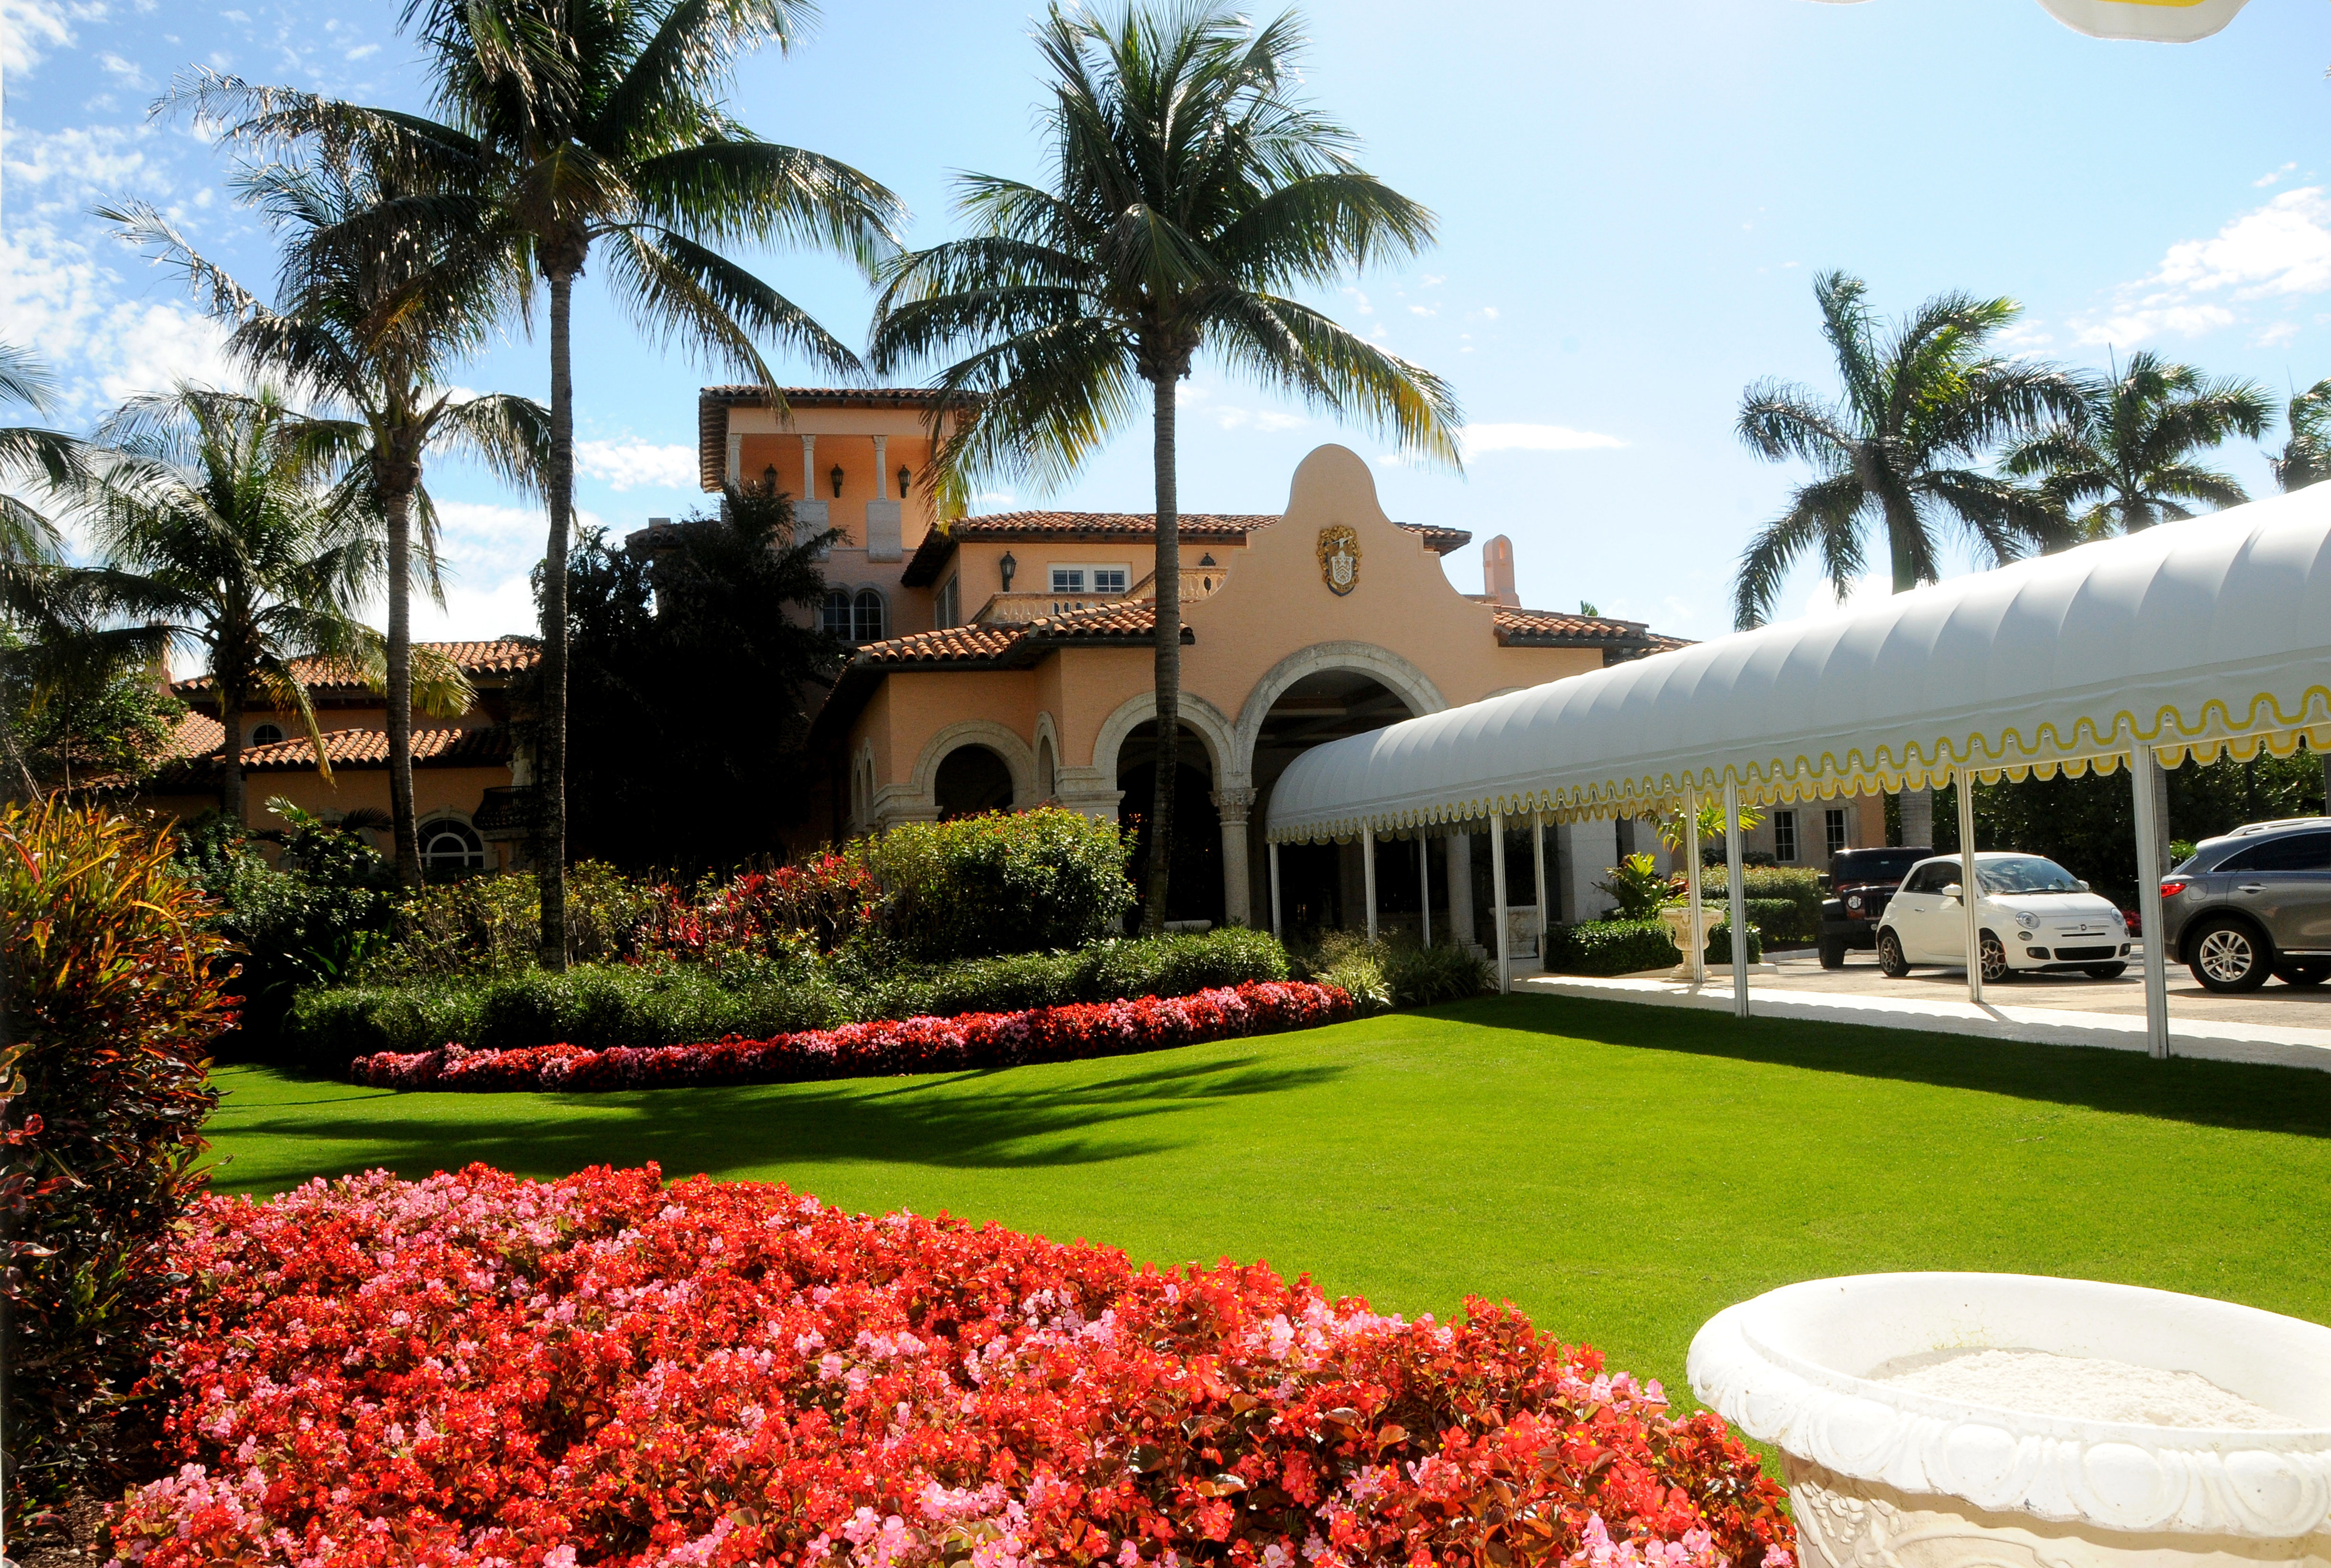 Another charity cancels event at Mar-a-Lago